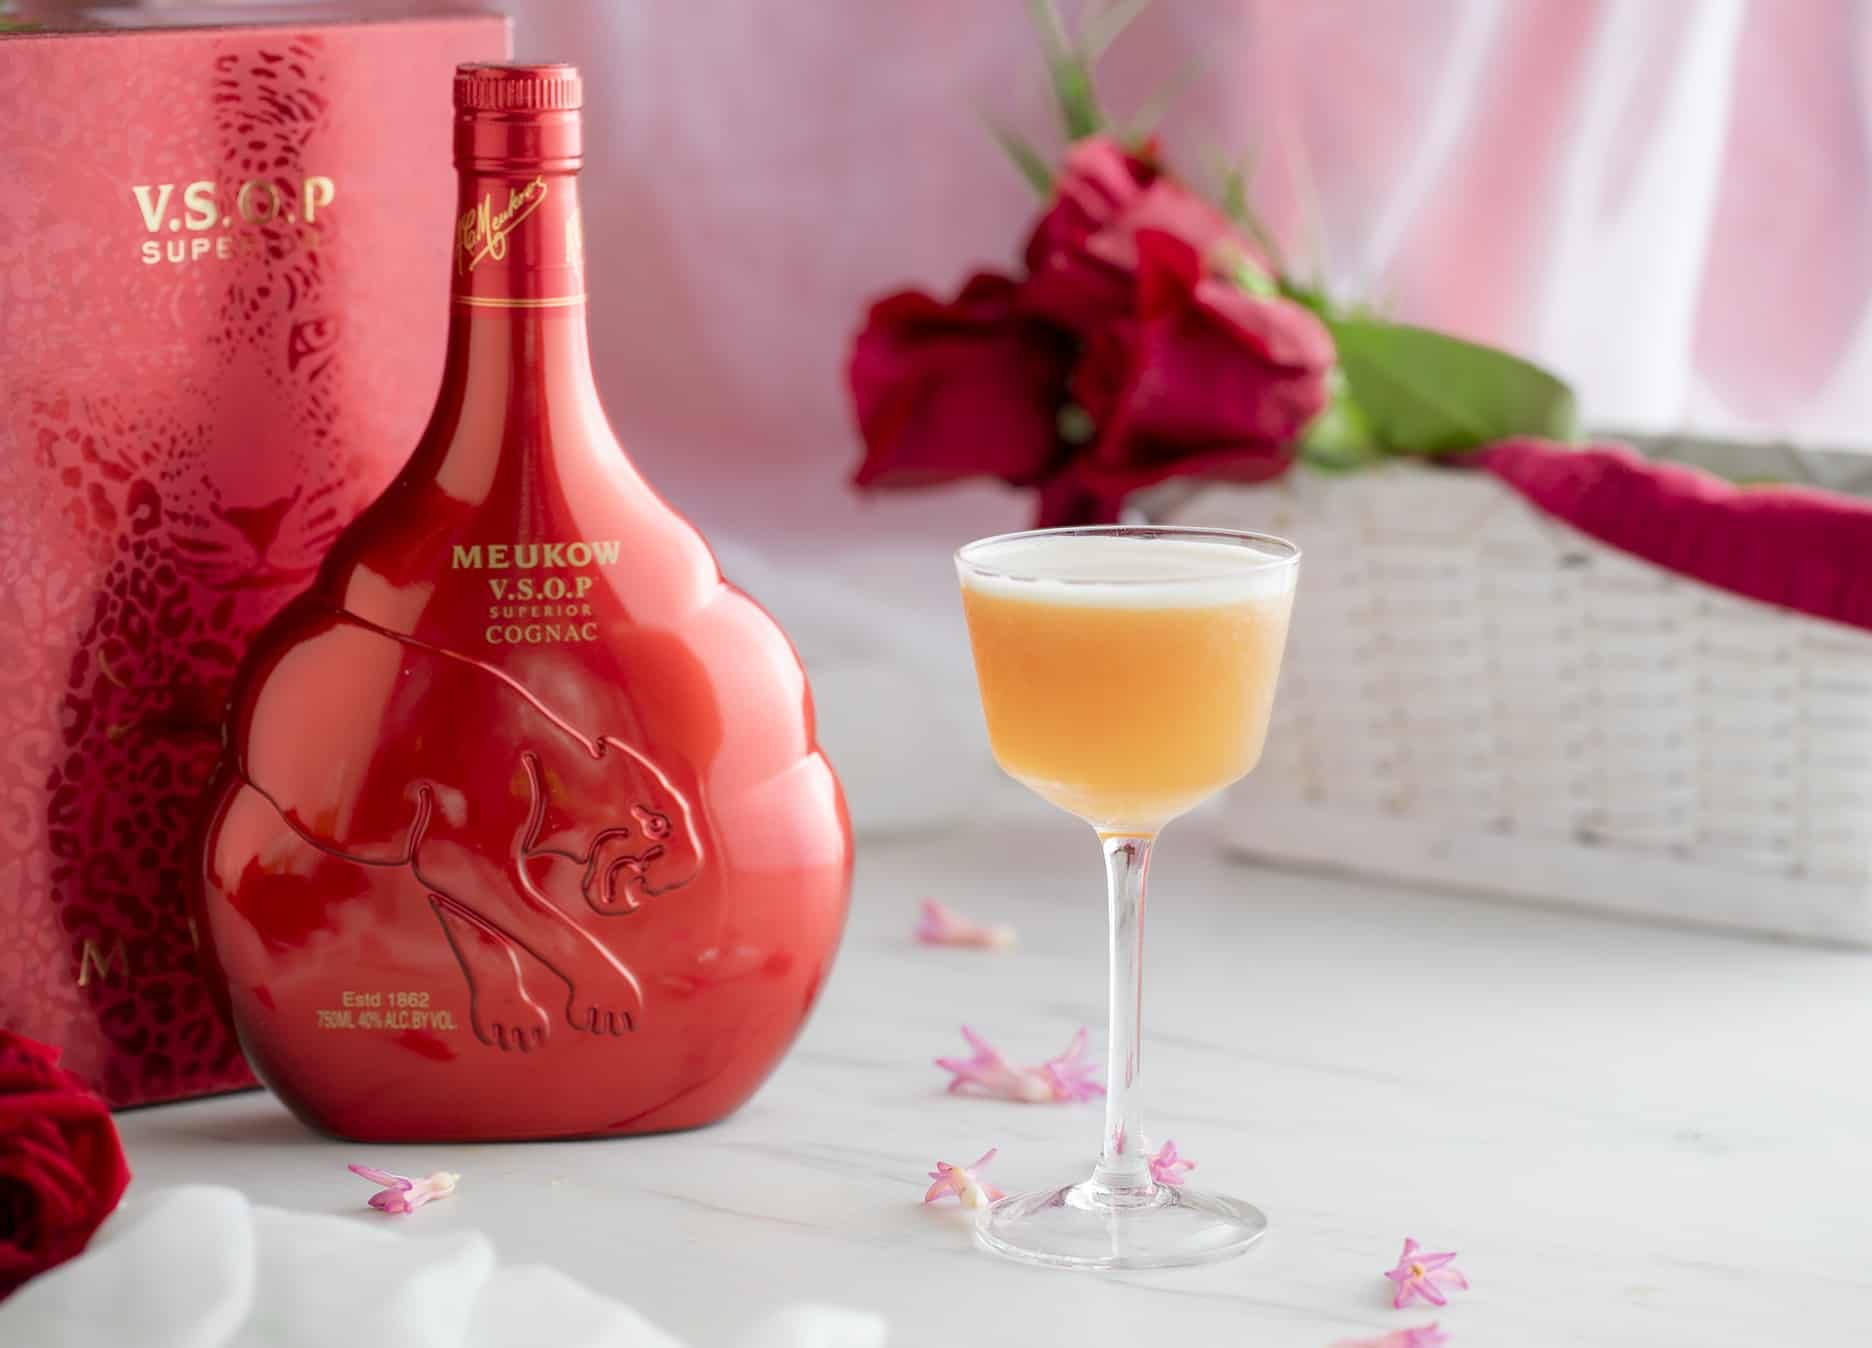 Hopeless Romantic - Valentine's Day Sidecar Cocktail inspired by Carrie  from Sex and the City | Liquid Culture